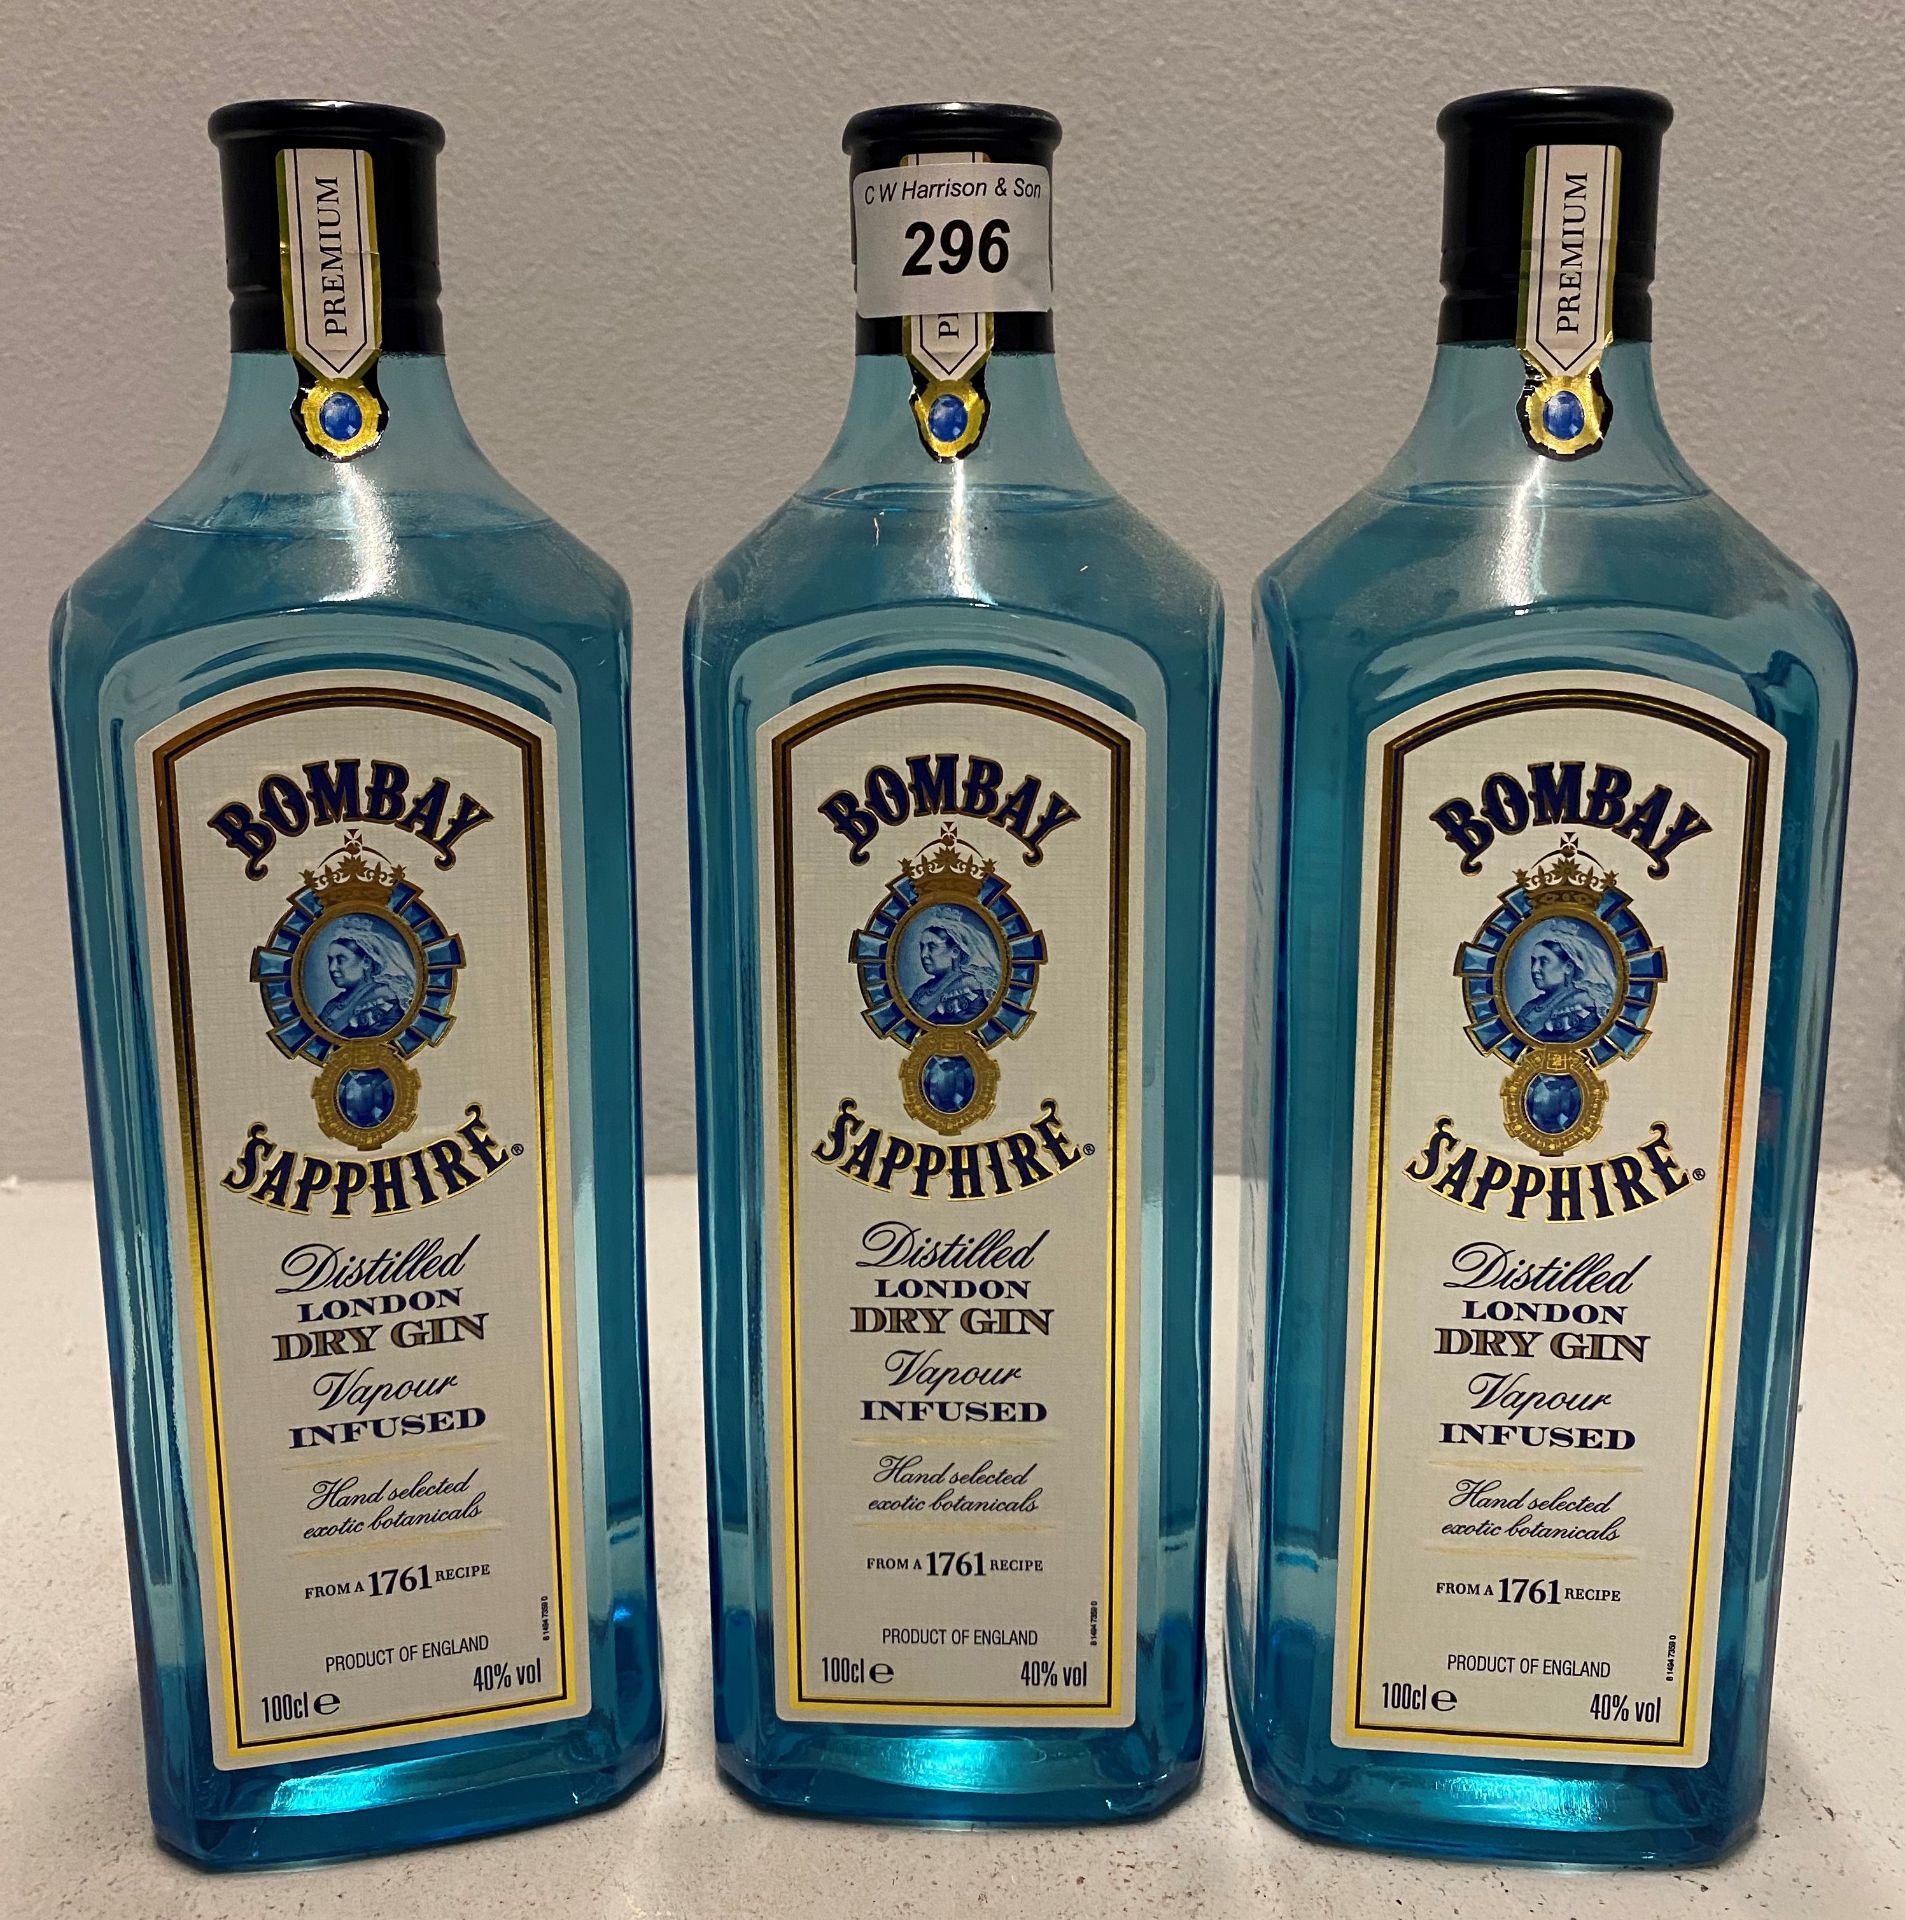 4 x 100cl bottles of Bombay Sapphire Gin